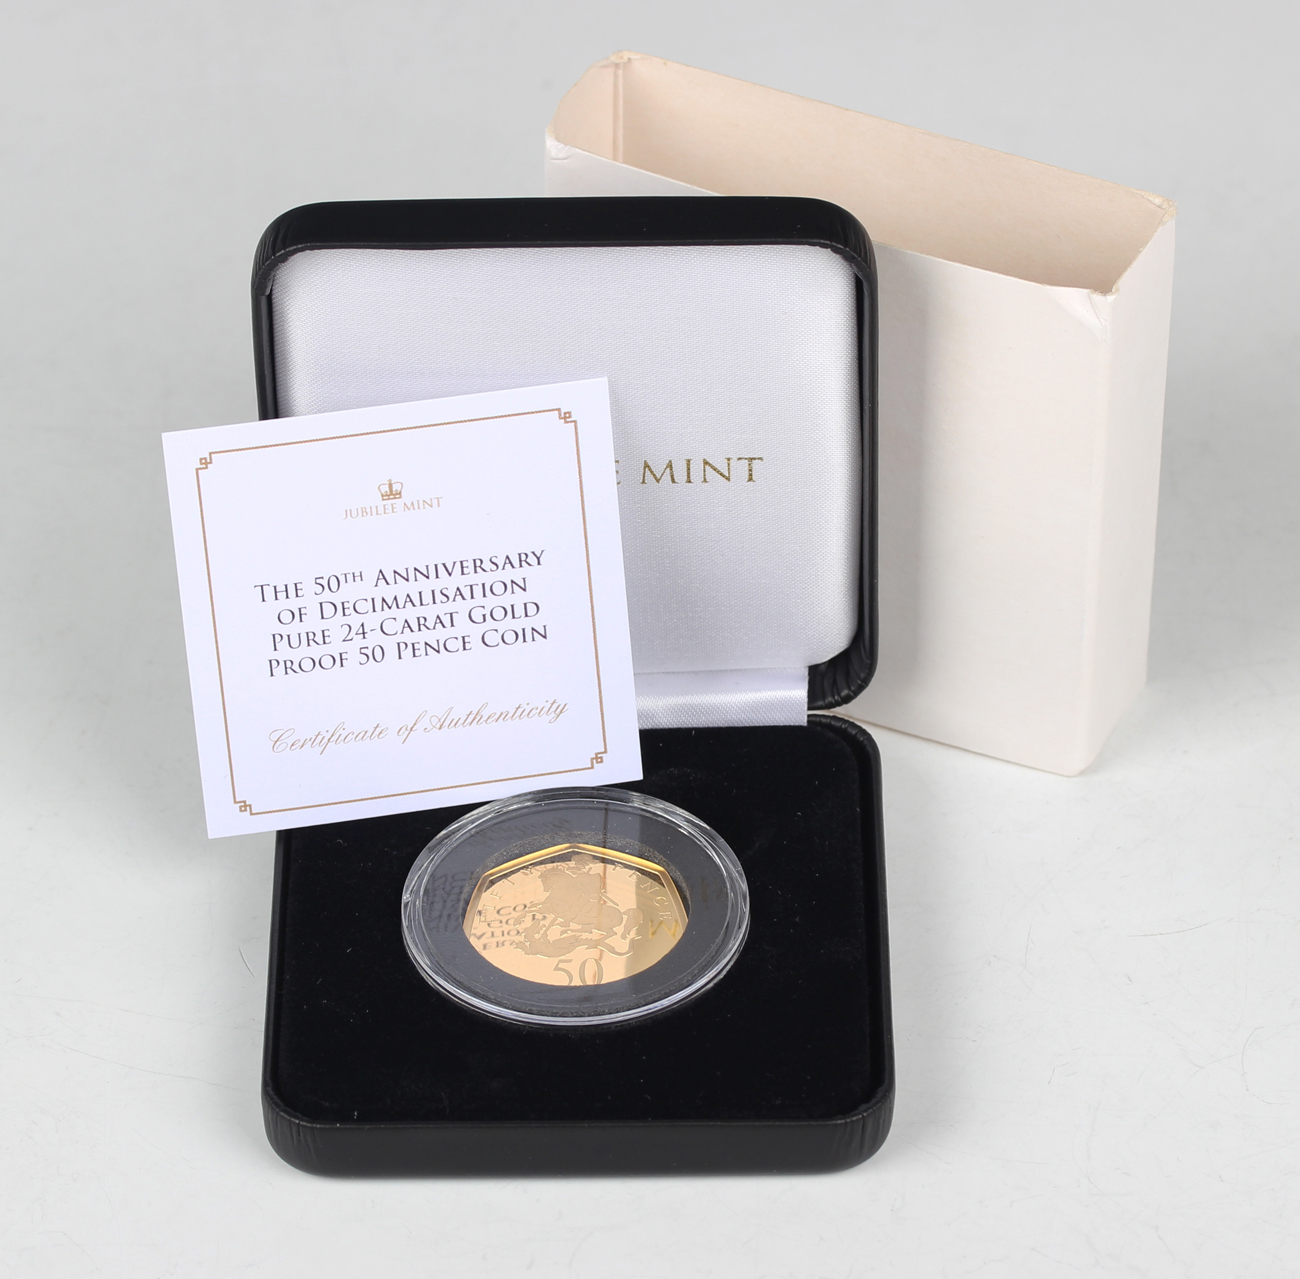 An Elizabeth II Jubilee Mint gold proof fifty pence coin 2021 commemorating the 50th anniversary